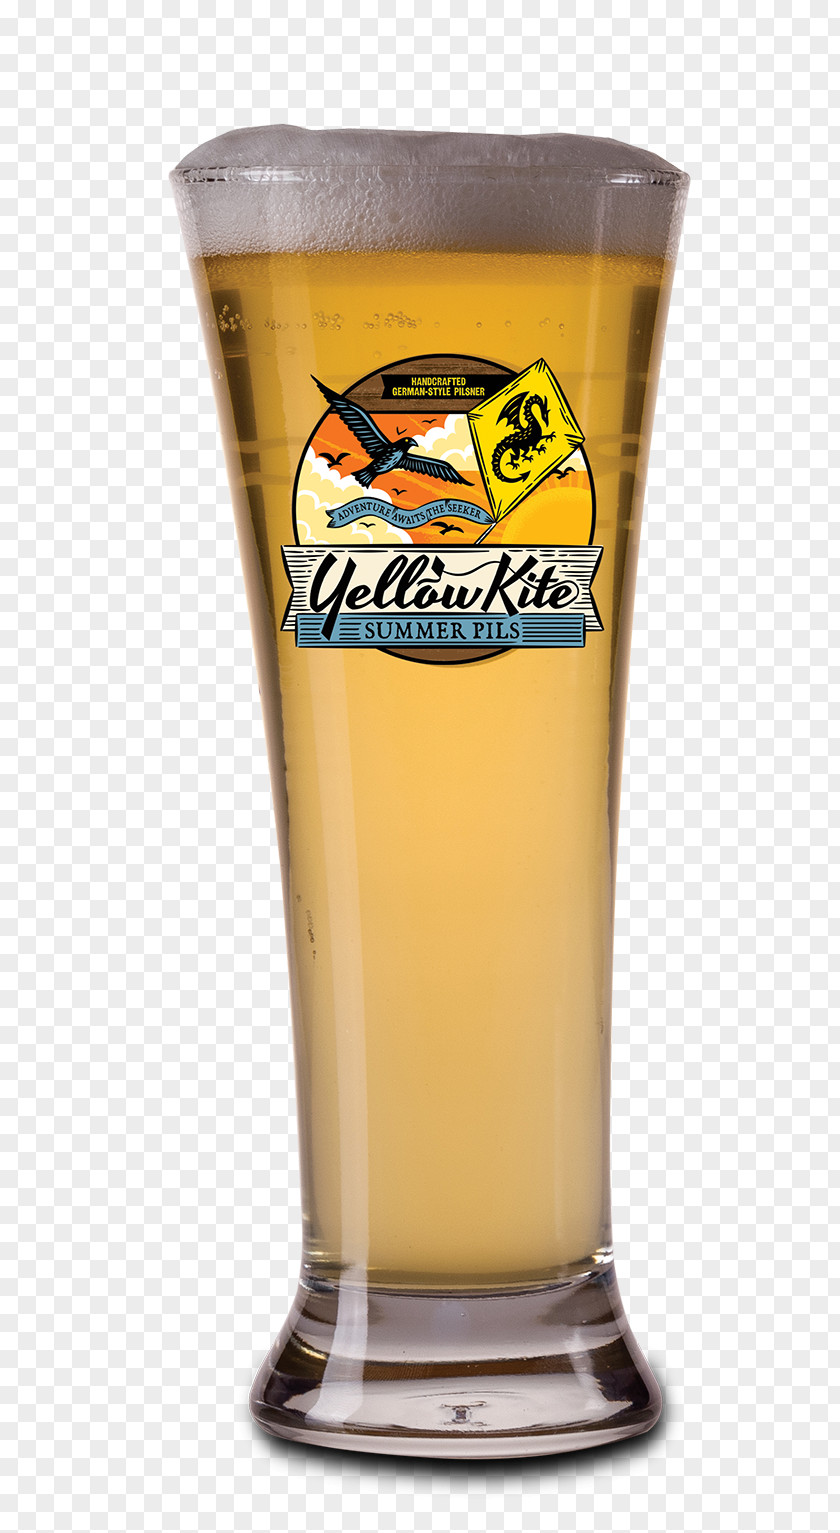 Yellow Kite Beer Cocktail Bristol Brewing Company Pilsner Wheat PNG